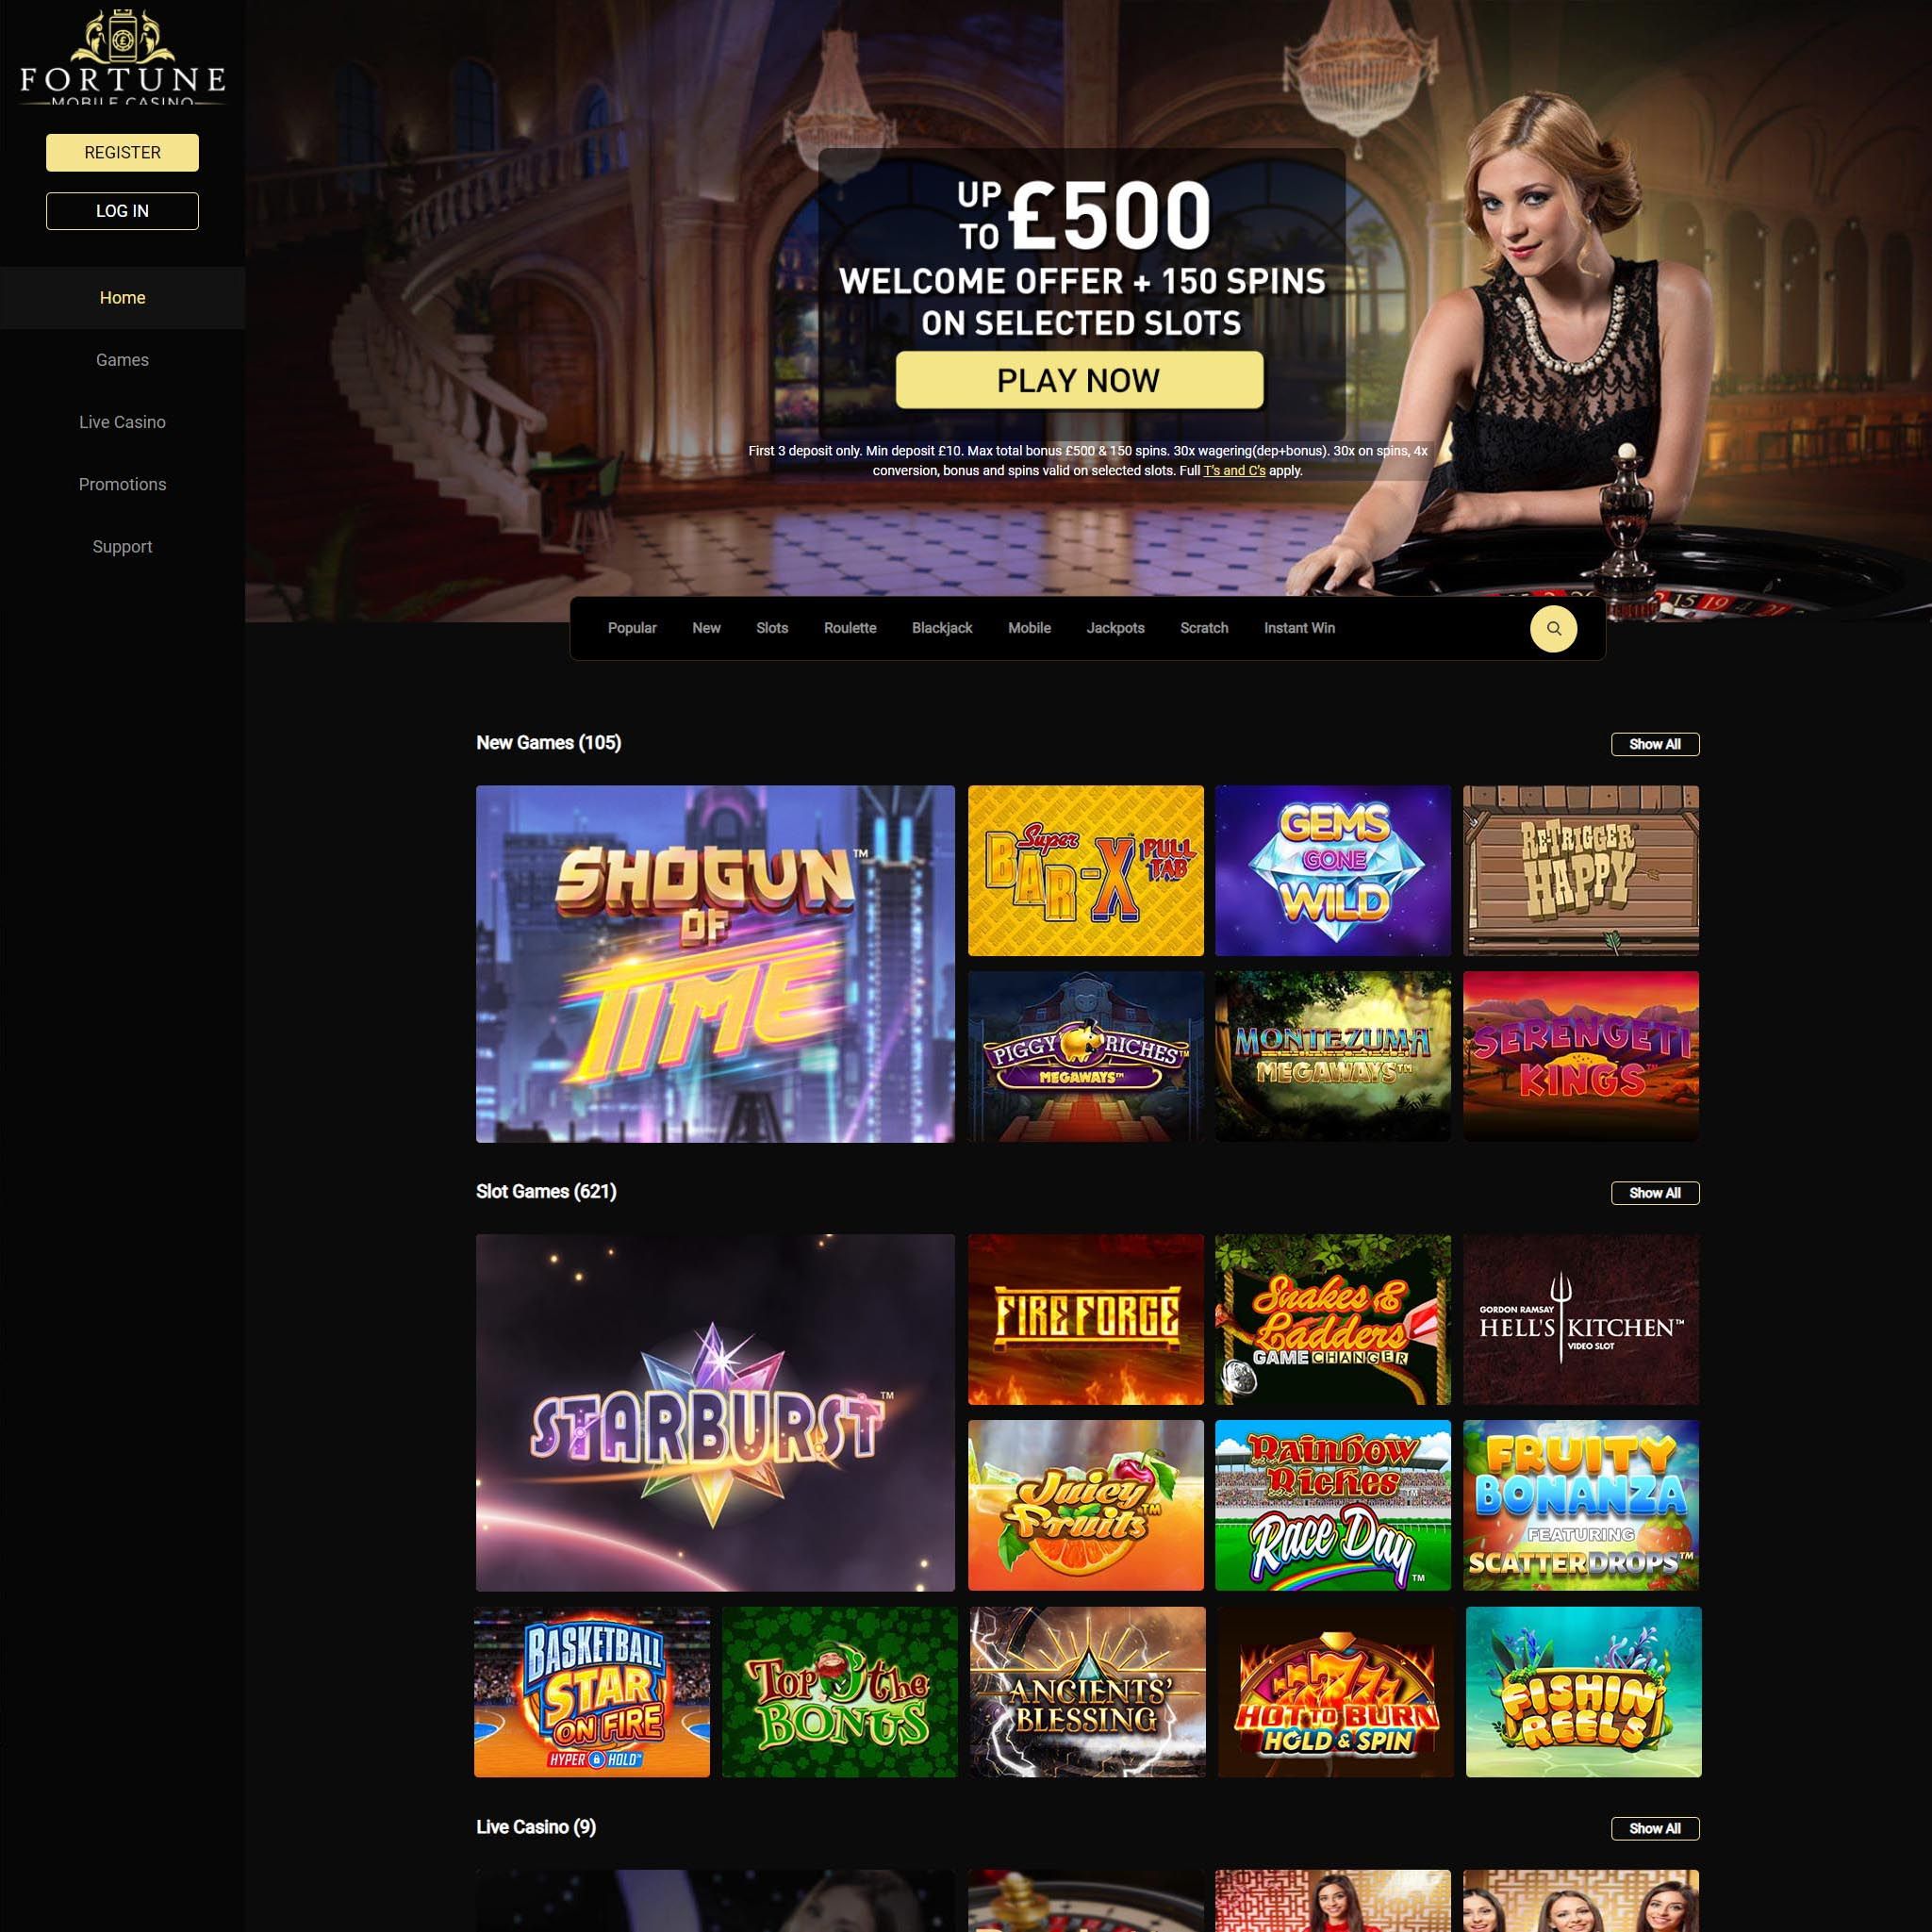 Fortune Mobile Casino review by Mr. Gamble